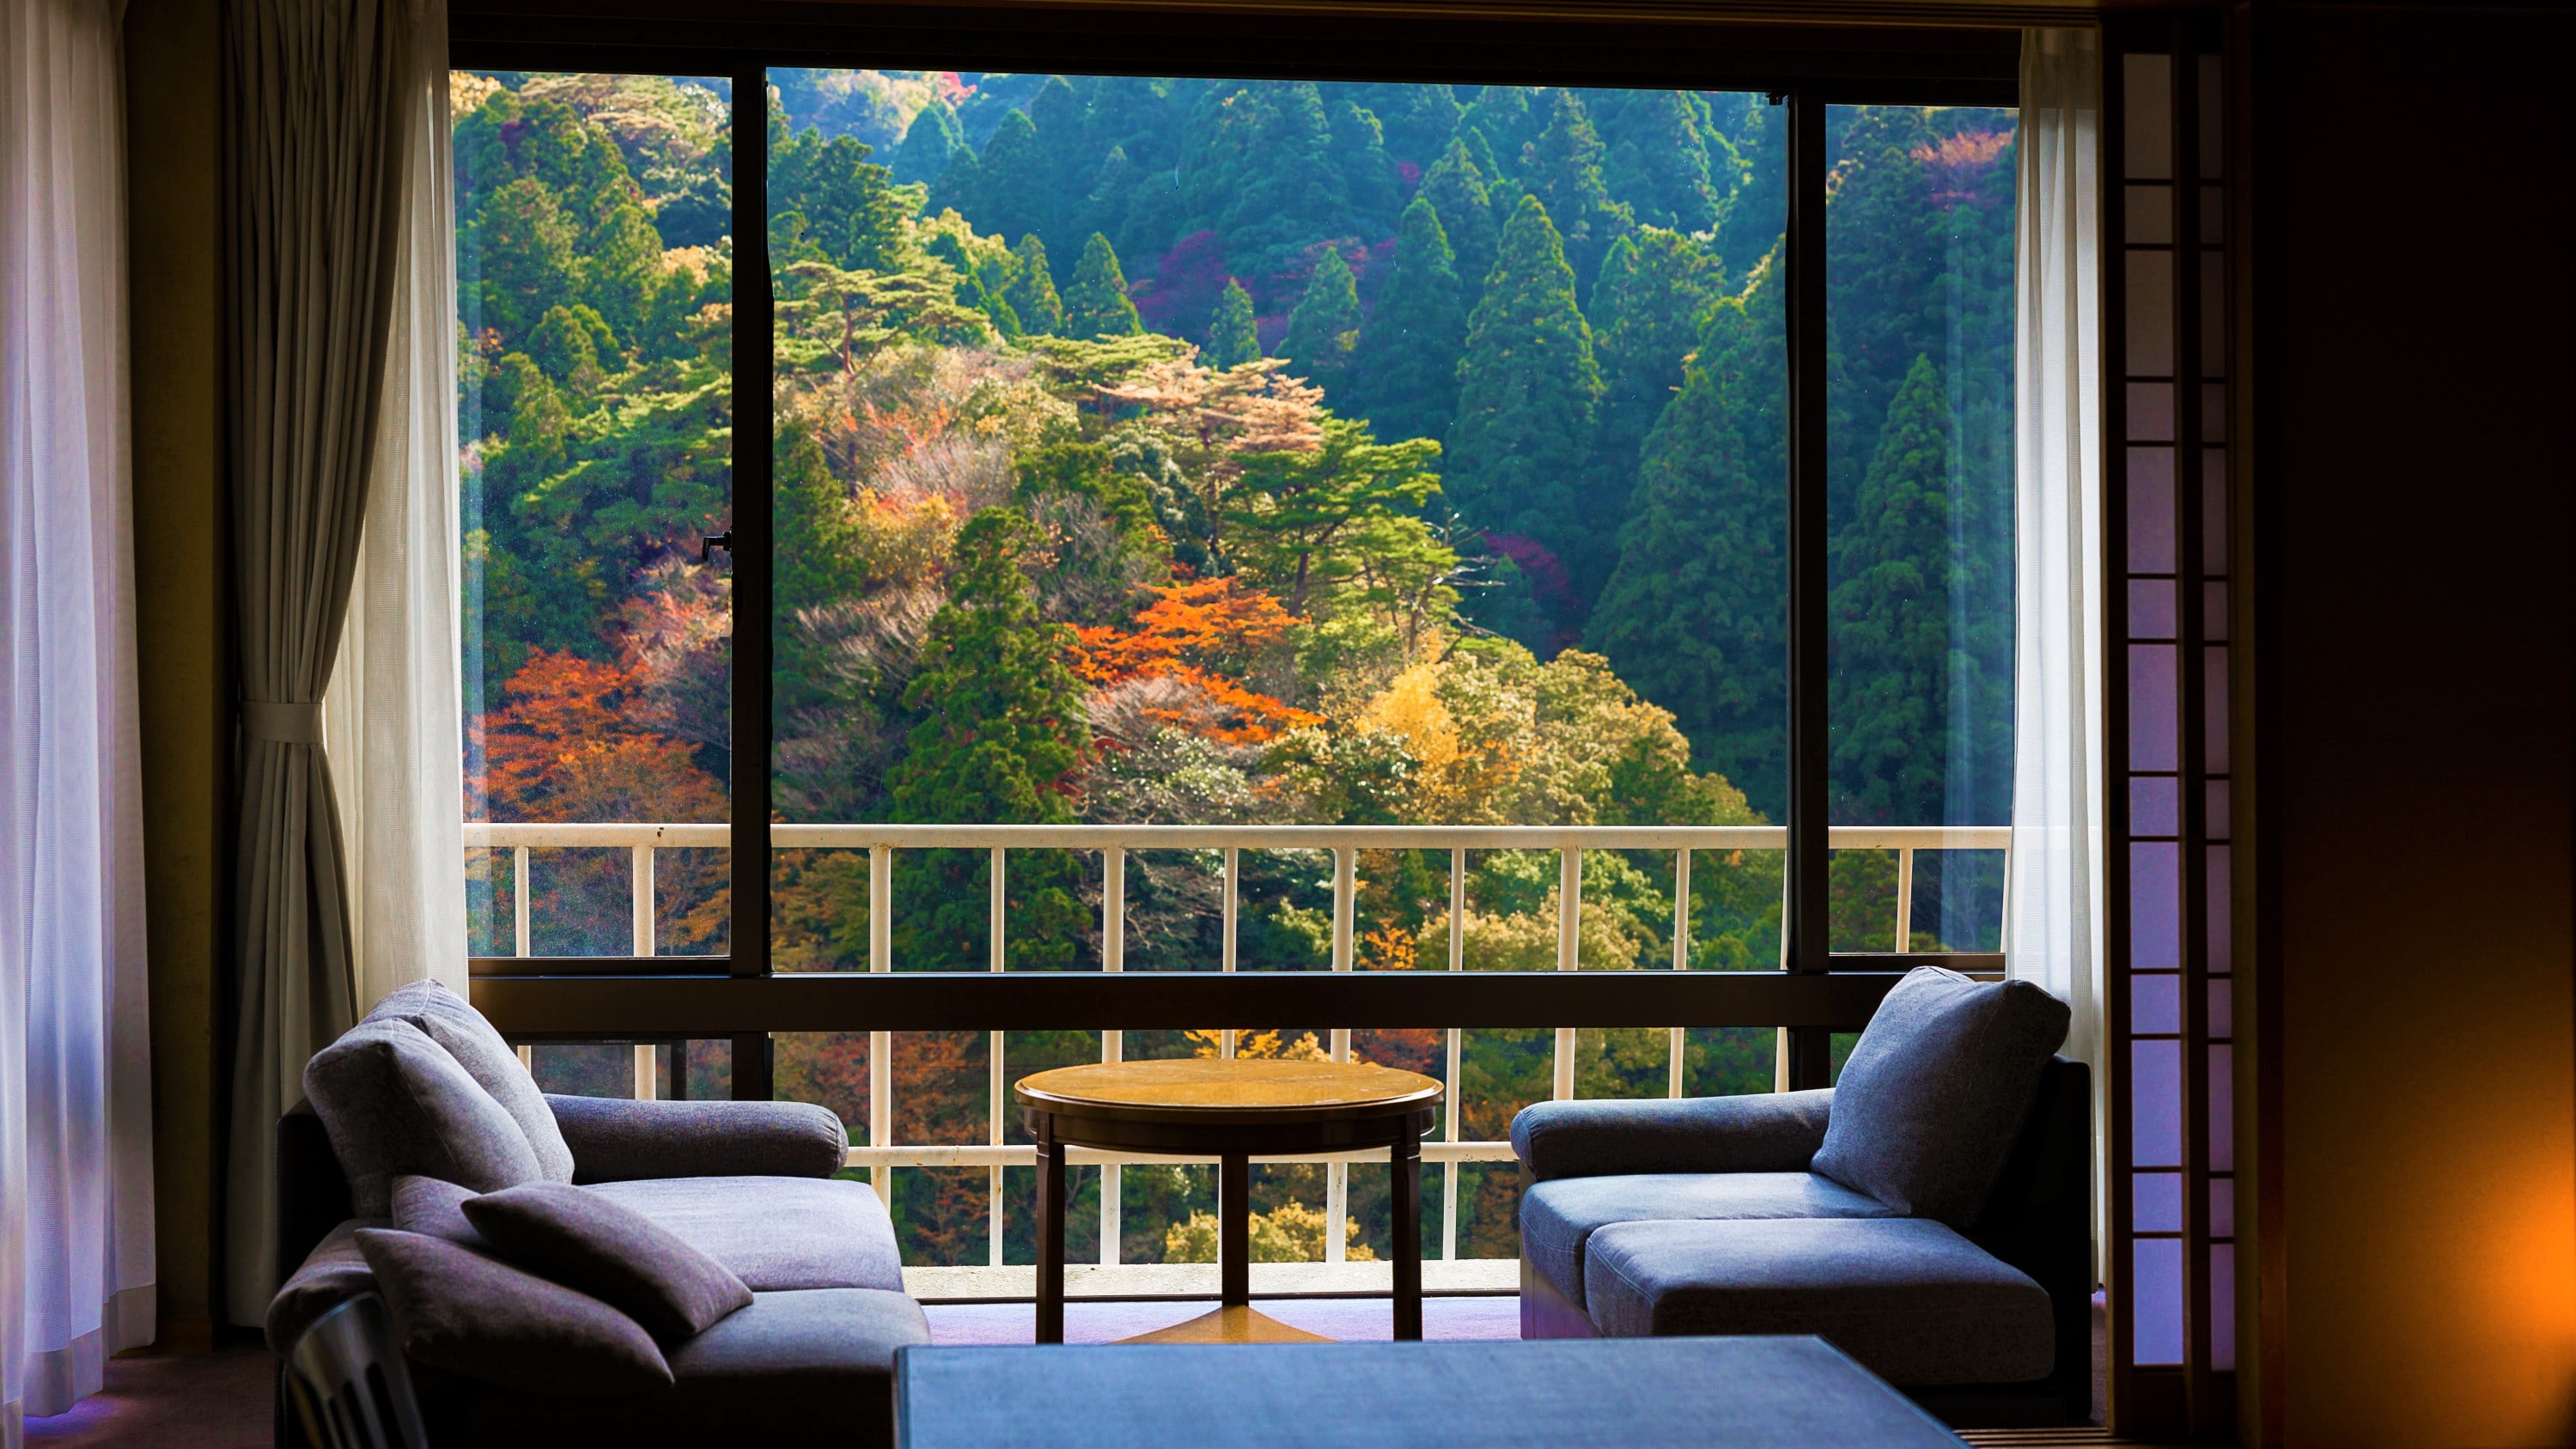 [View from the room] Mountain scenery surrounded by greenery